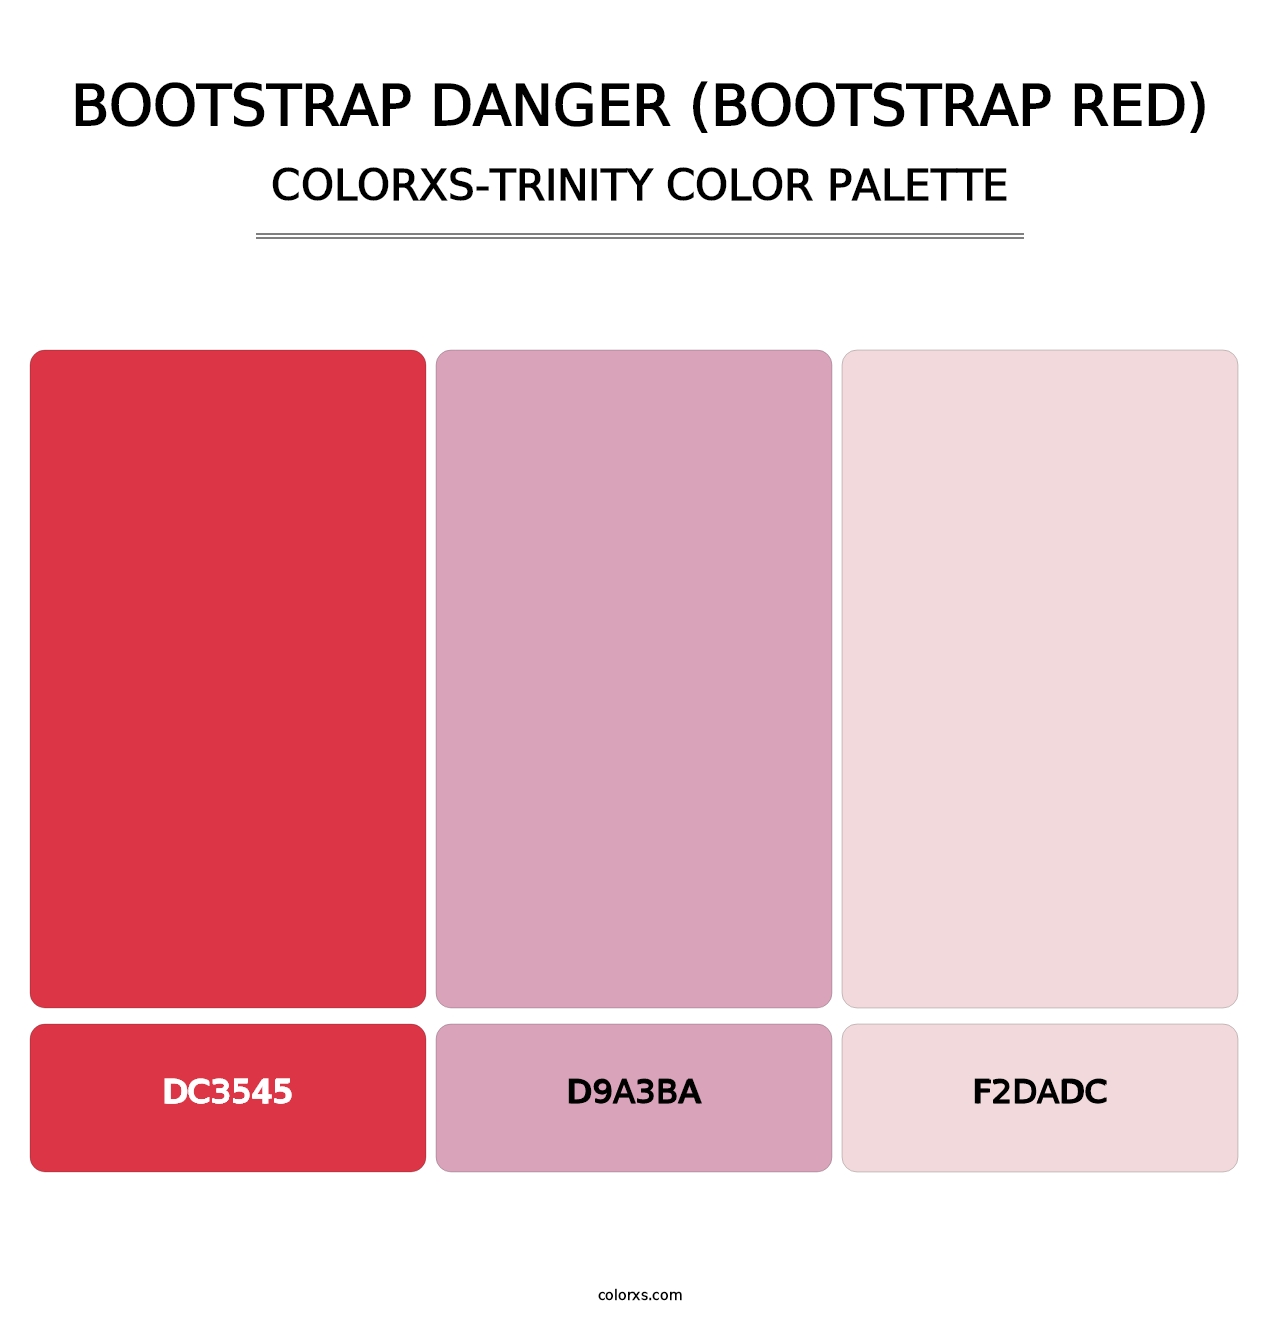 Bootstrap Danger (Bootstrap Red) - Colorxs Trinity Palette